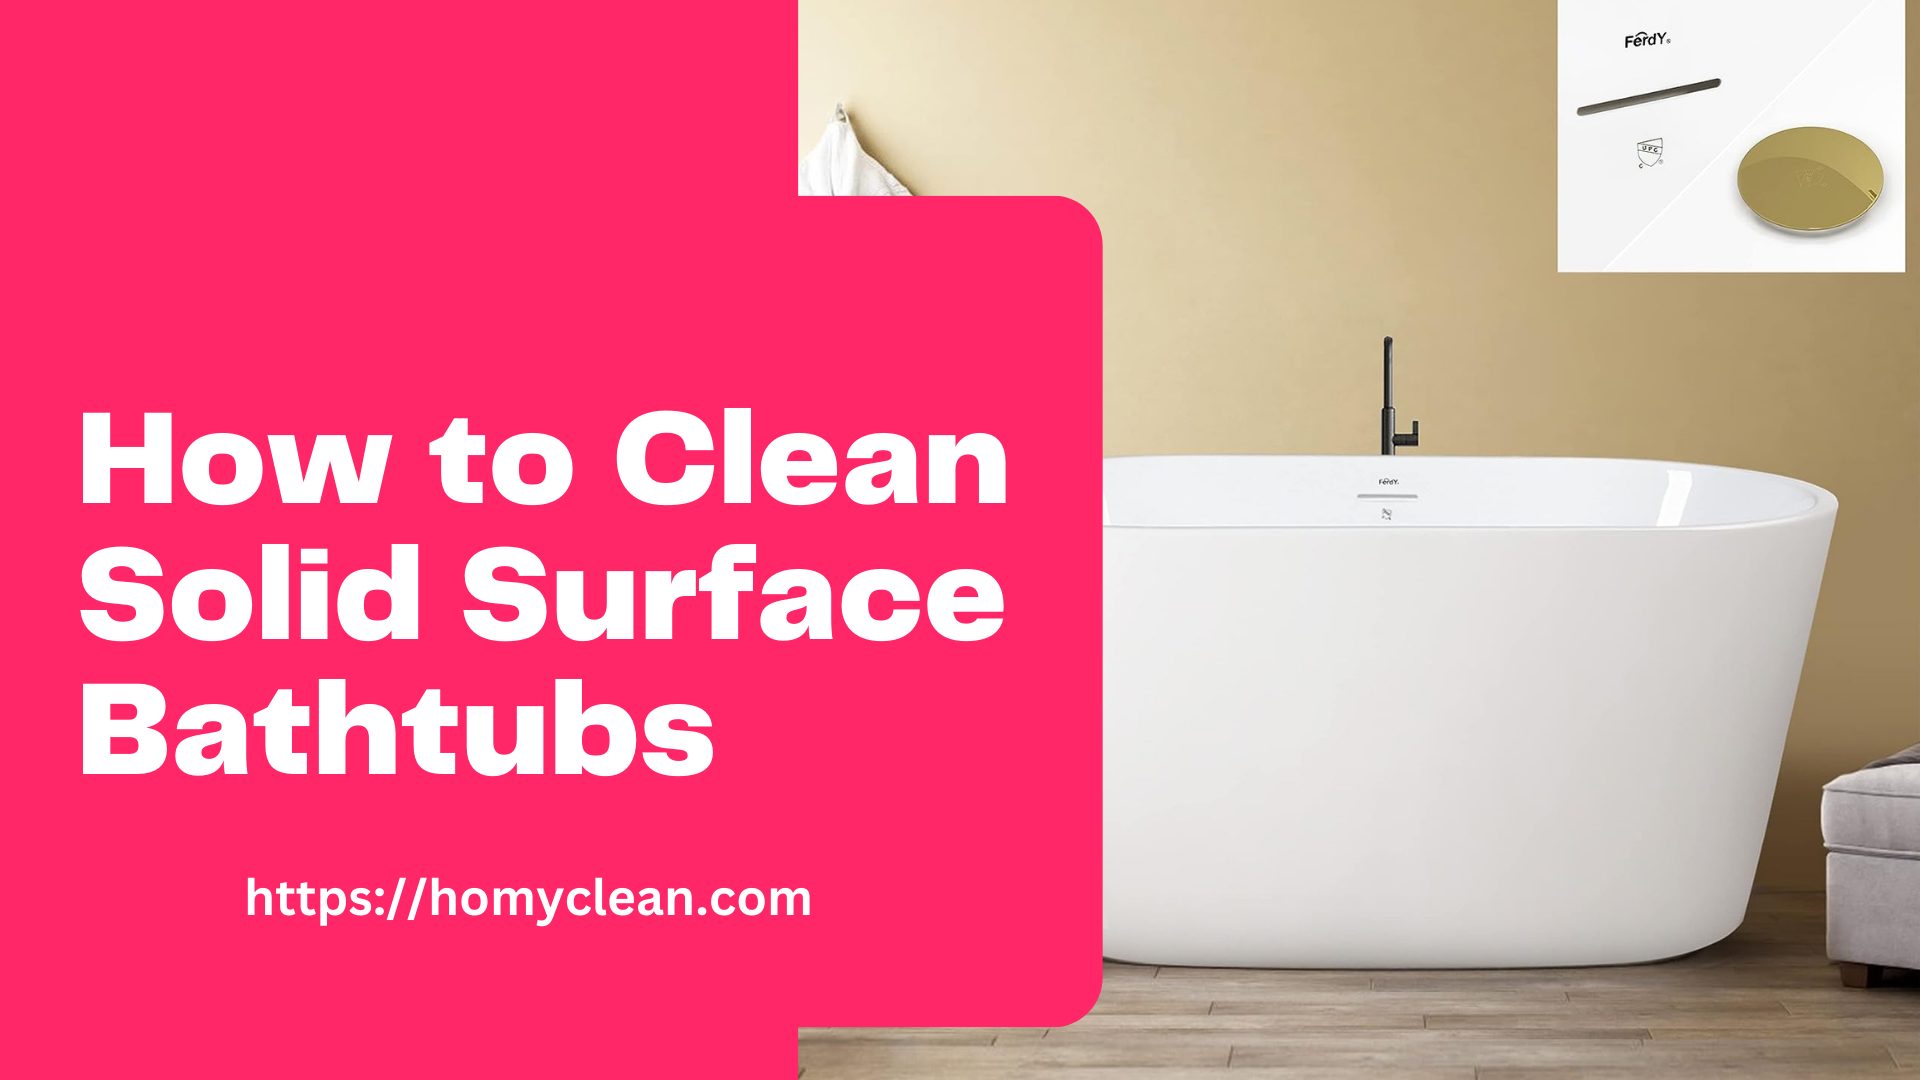 How to Clean Solid Surface Bathtubs